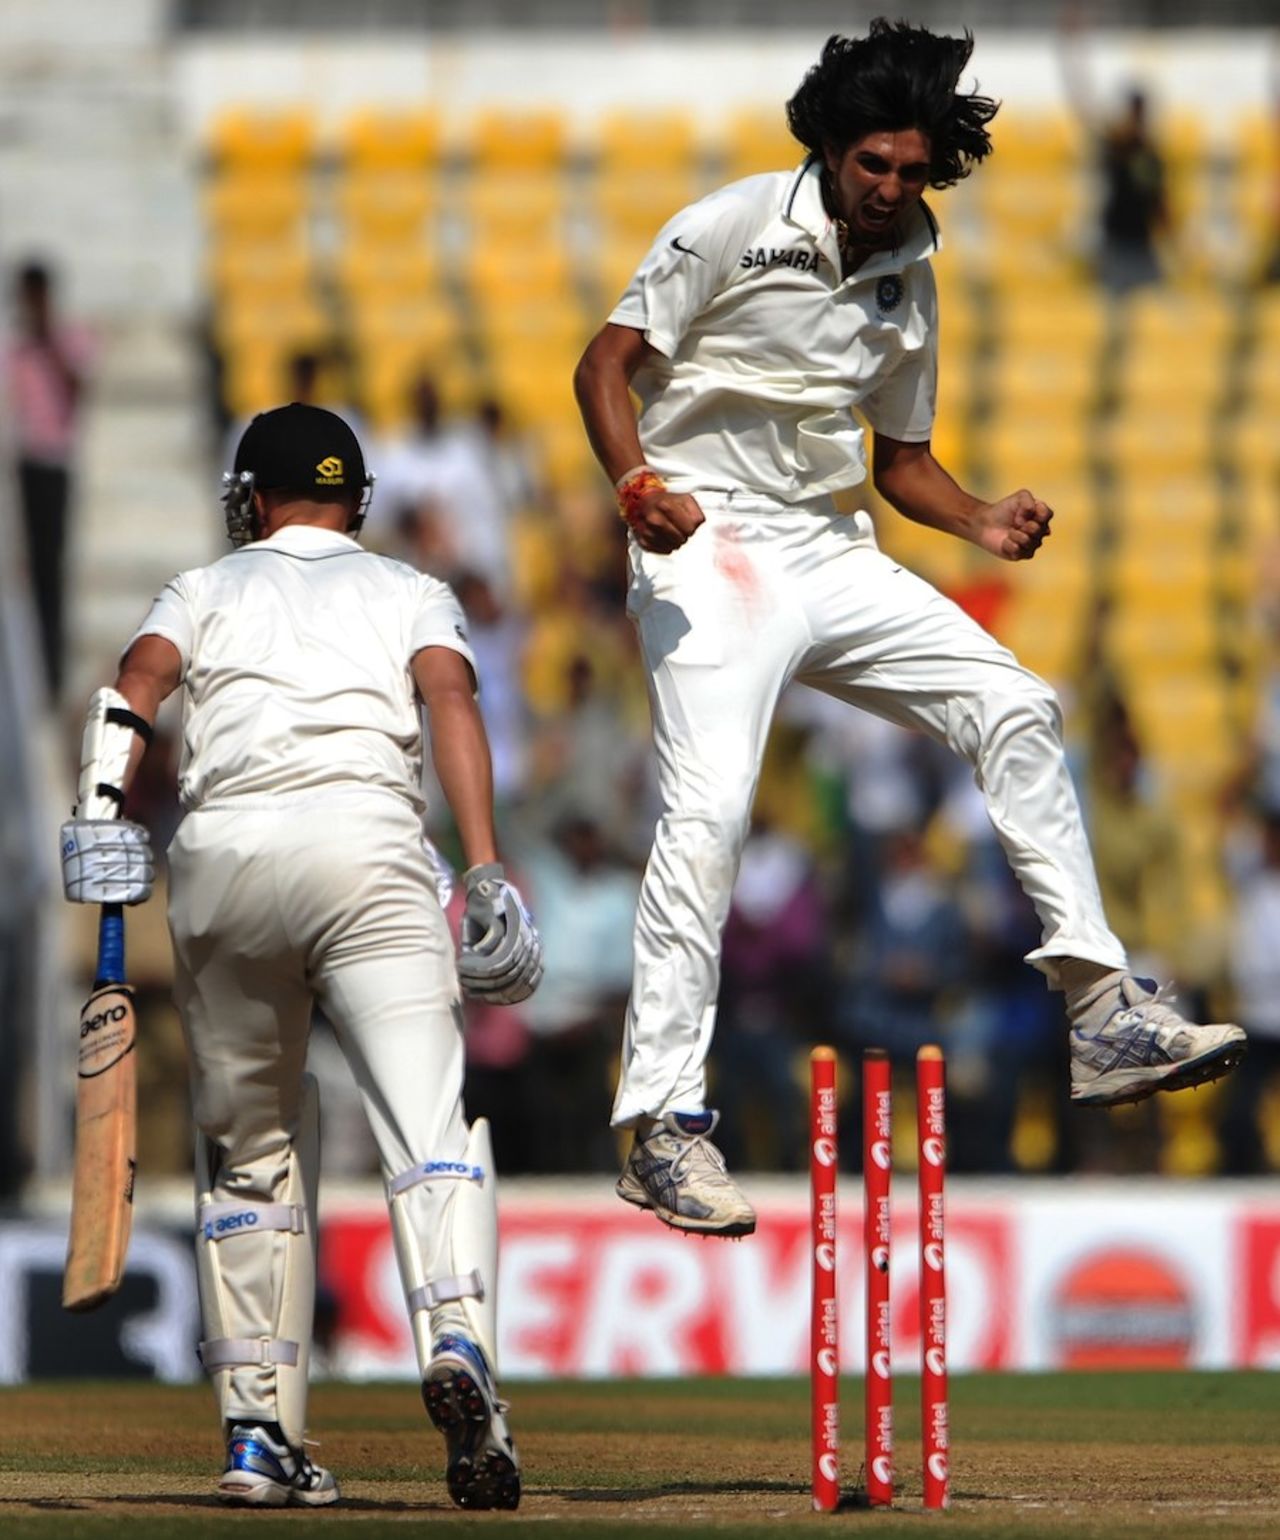 Ishant Sharma ended the series with Chris Martin's wicket, India v New Zealand, 3rd Test, Nagpur, 4th day, November 23, 2010